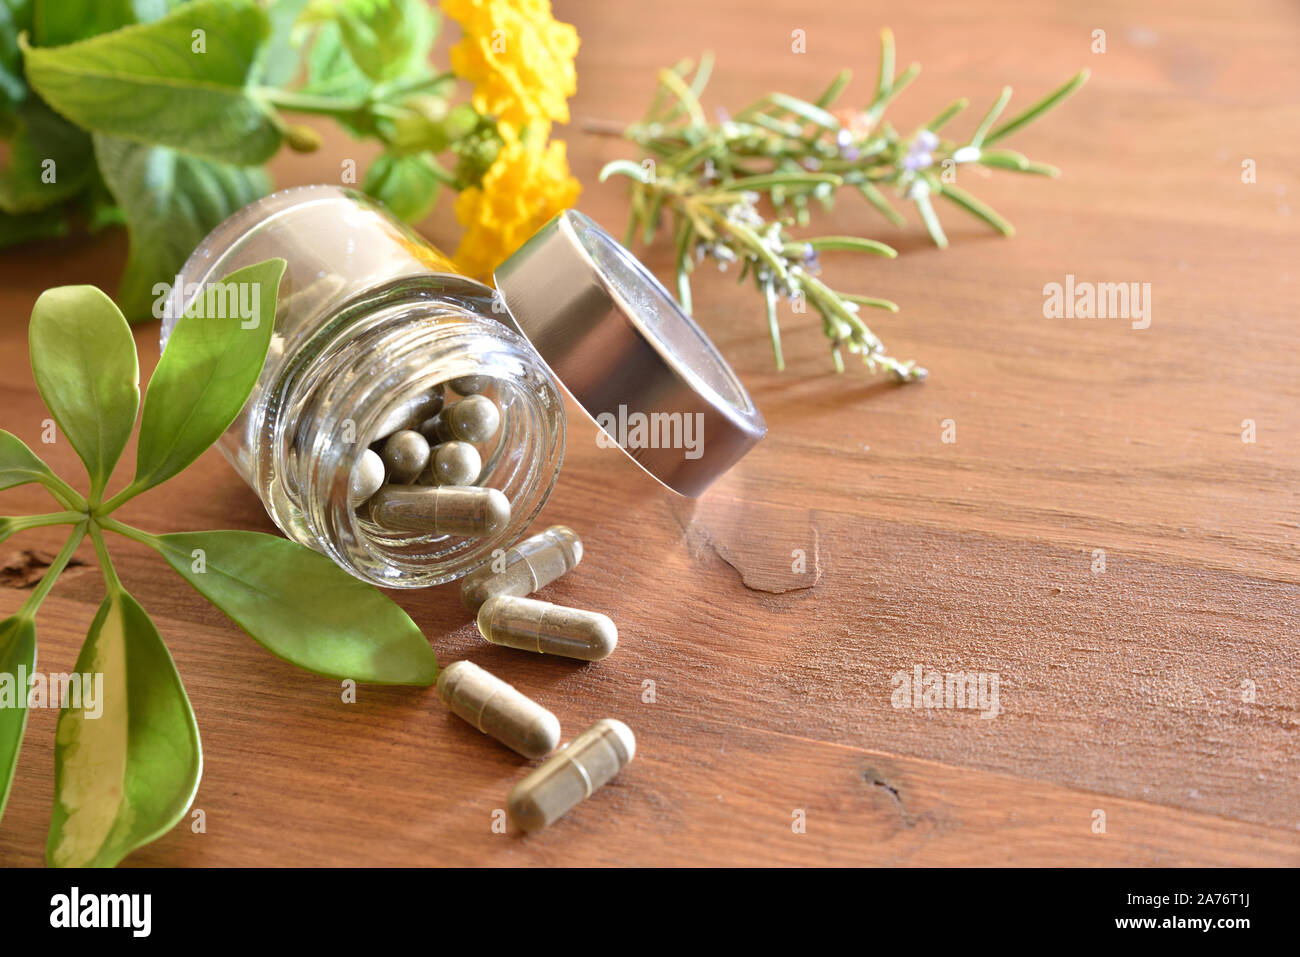 Natural medicine capsules in open glass jar lying on wood table with flowers and plant leaves. Natural medicine concept. Elevated view. Horizontal com Stock Photo